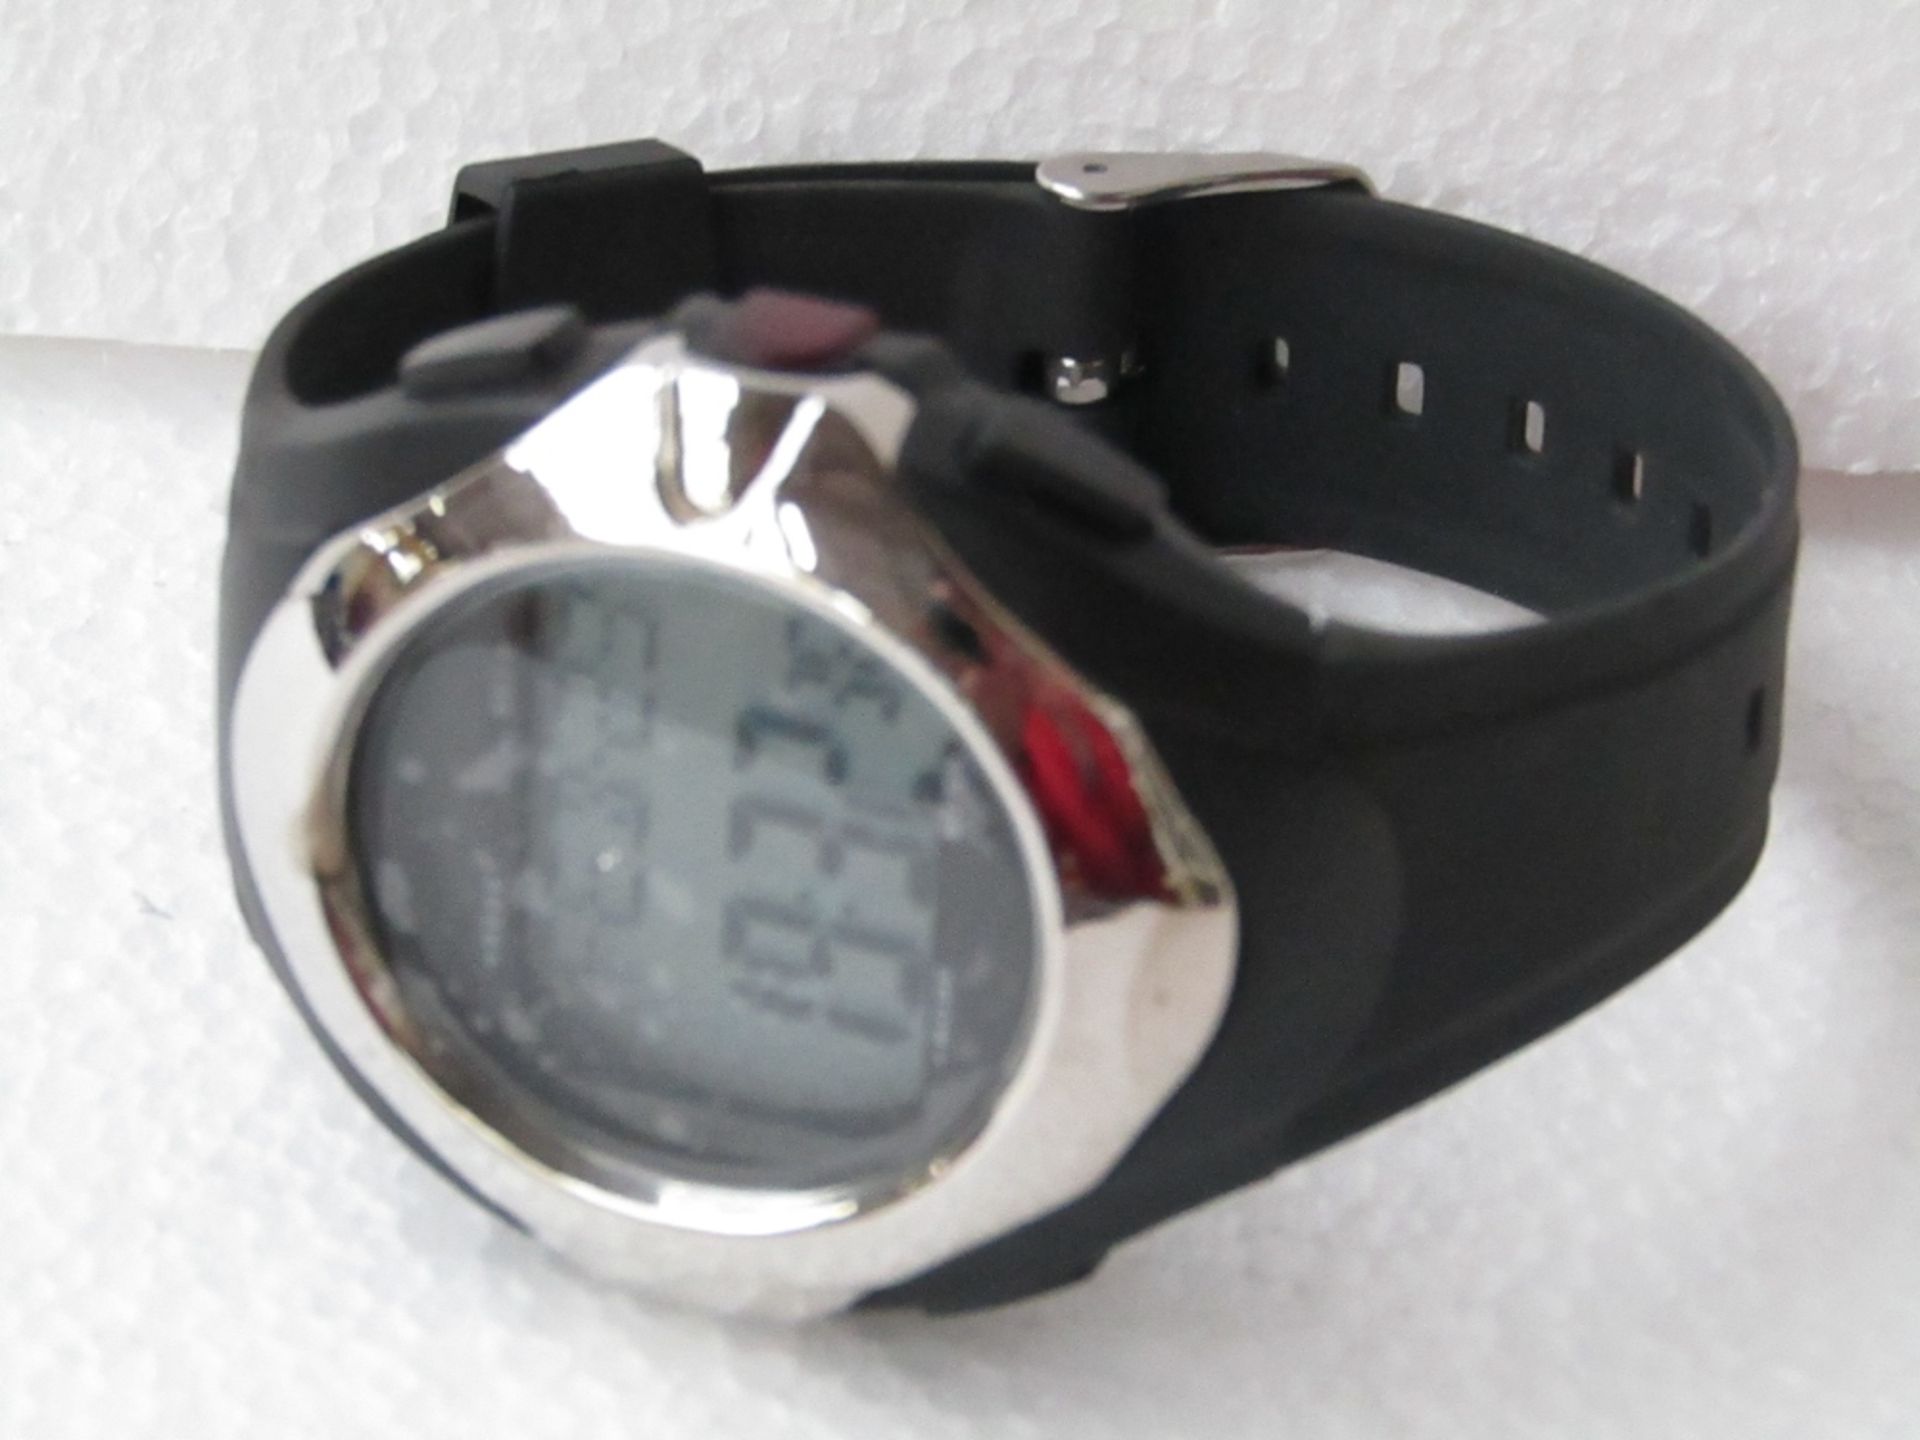 Designer Habitat Pulse rate monitor watch, new and working